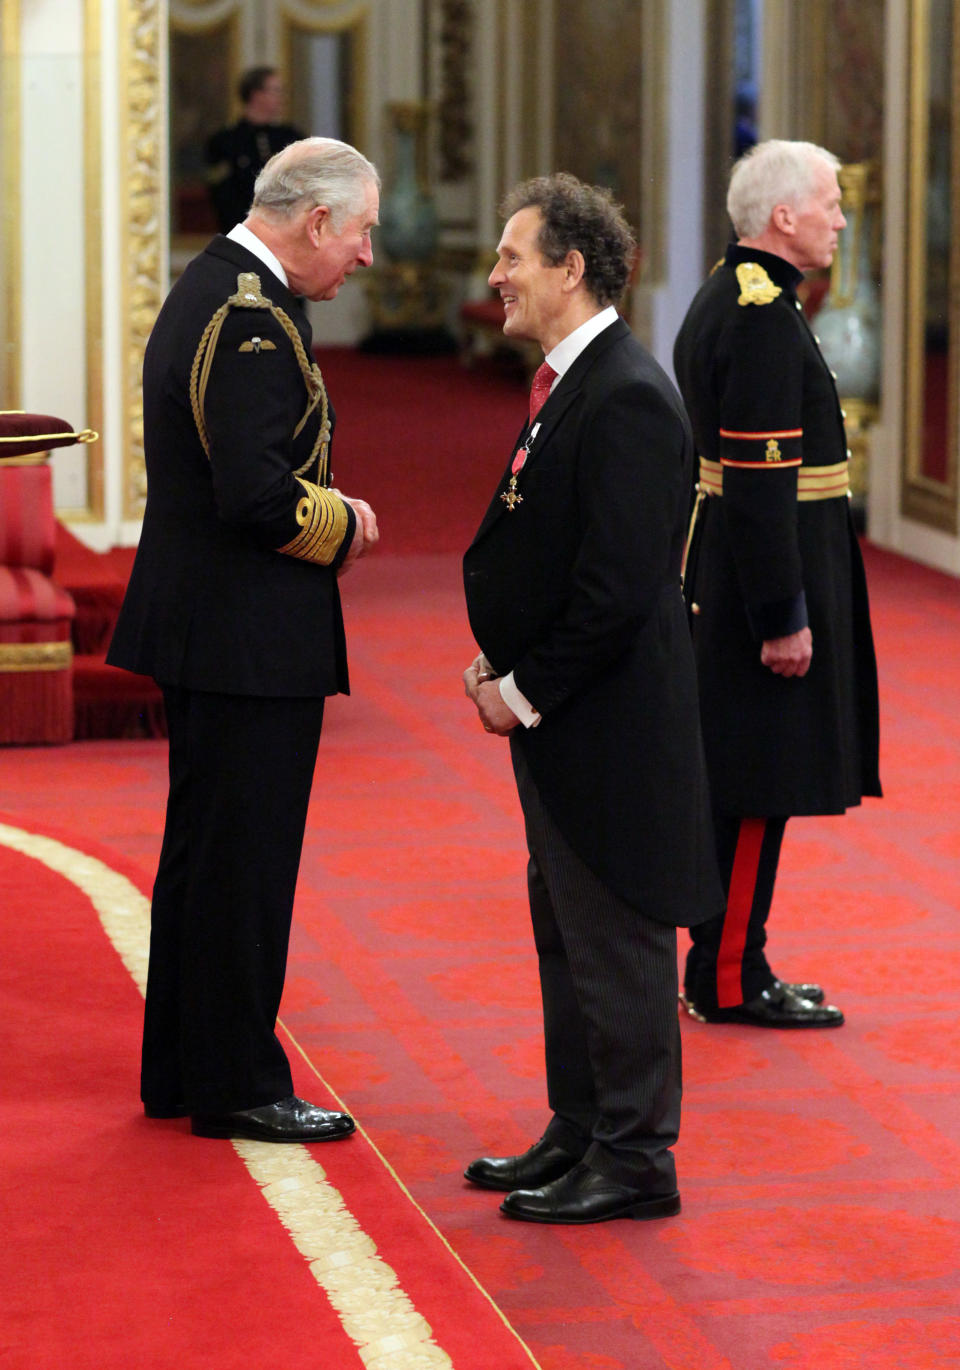 TV gardener Monty Don receives his OBE (Officer of the Order of the British Empire) from the Prince of Wales during an investiture ceremony at Buckingham Palace, London.